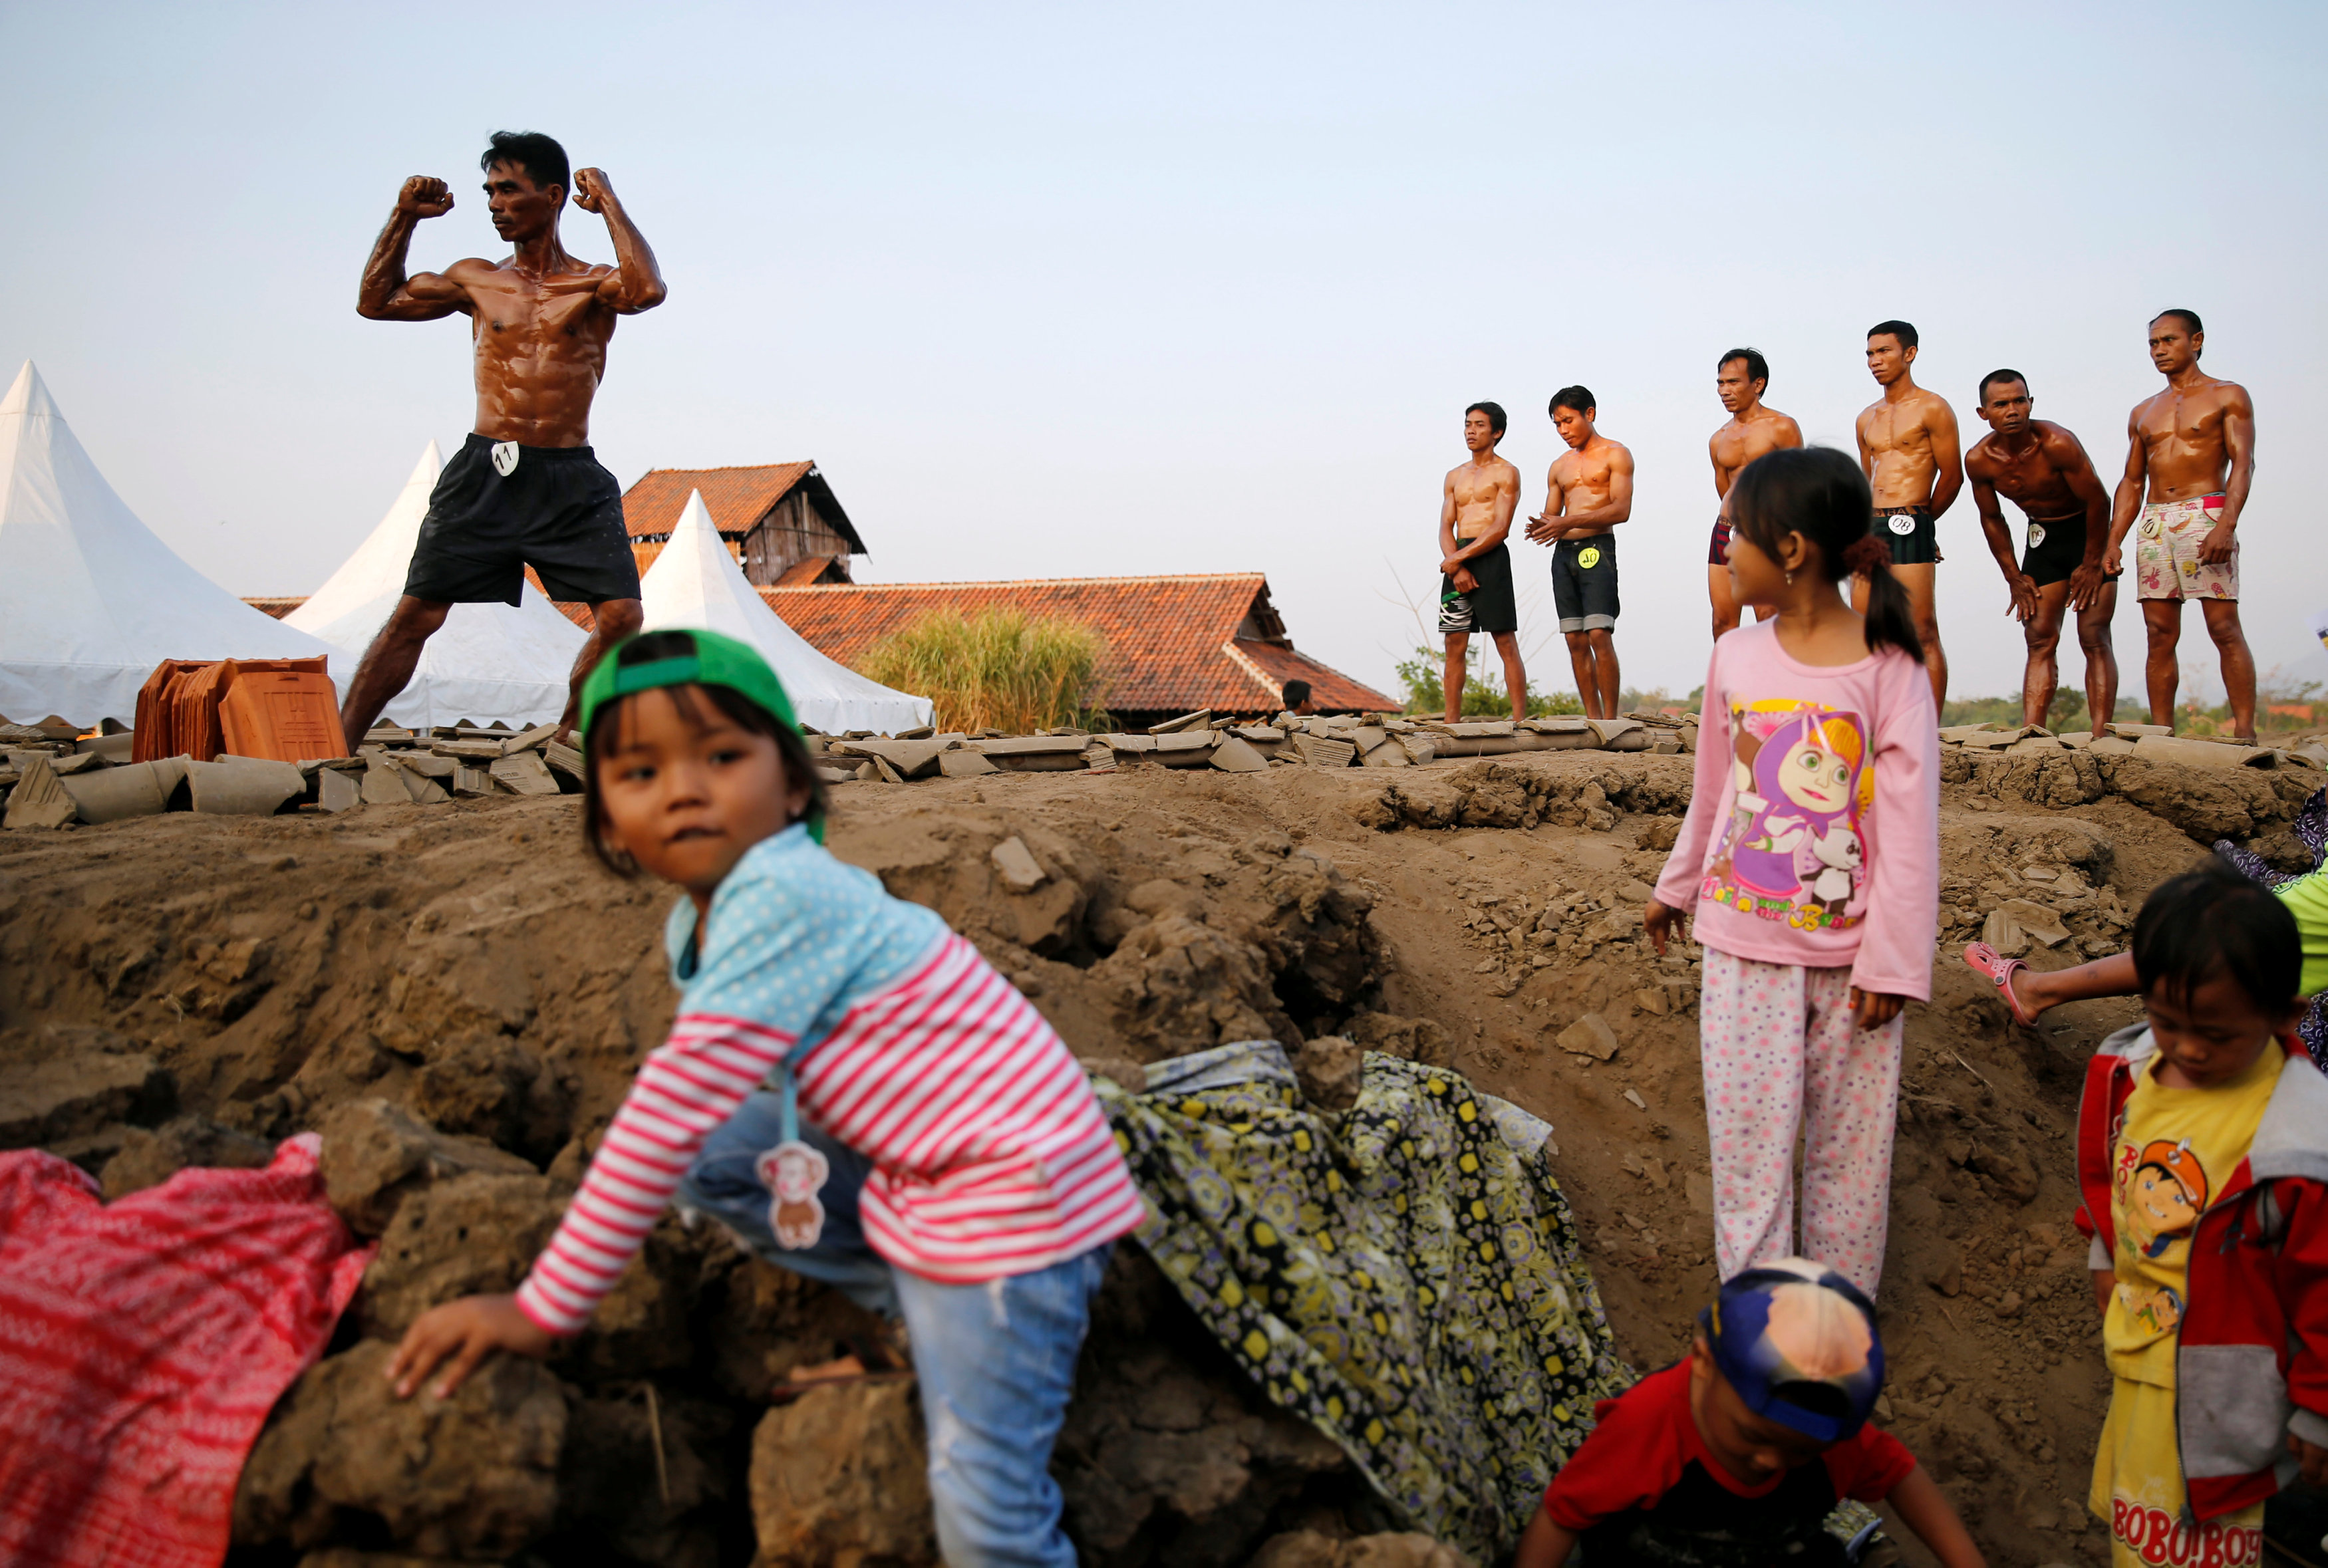 In pictures: Tile workers in Indonesia